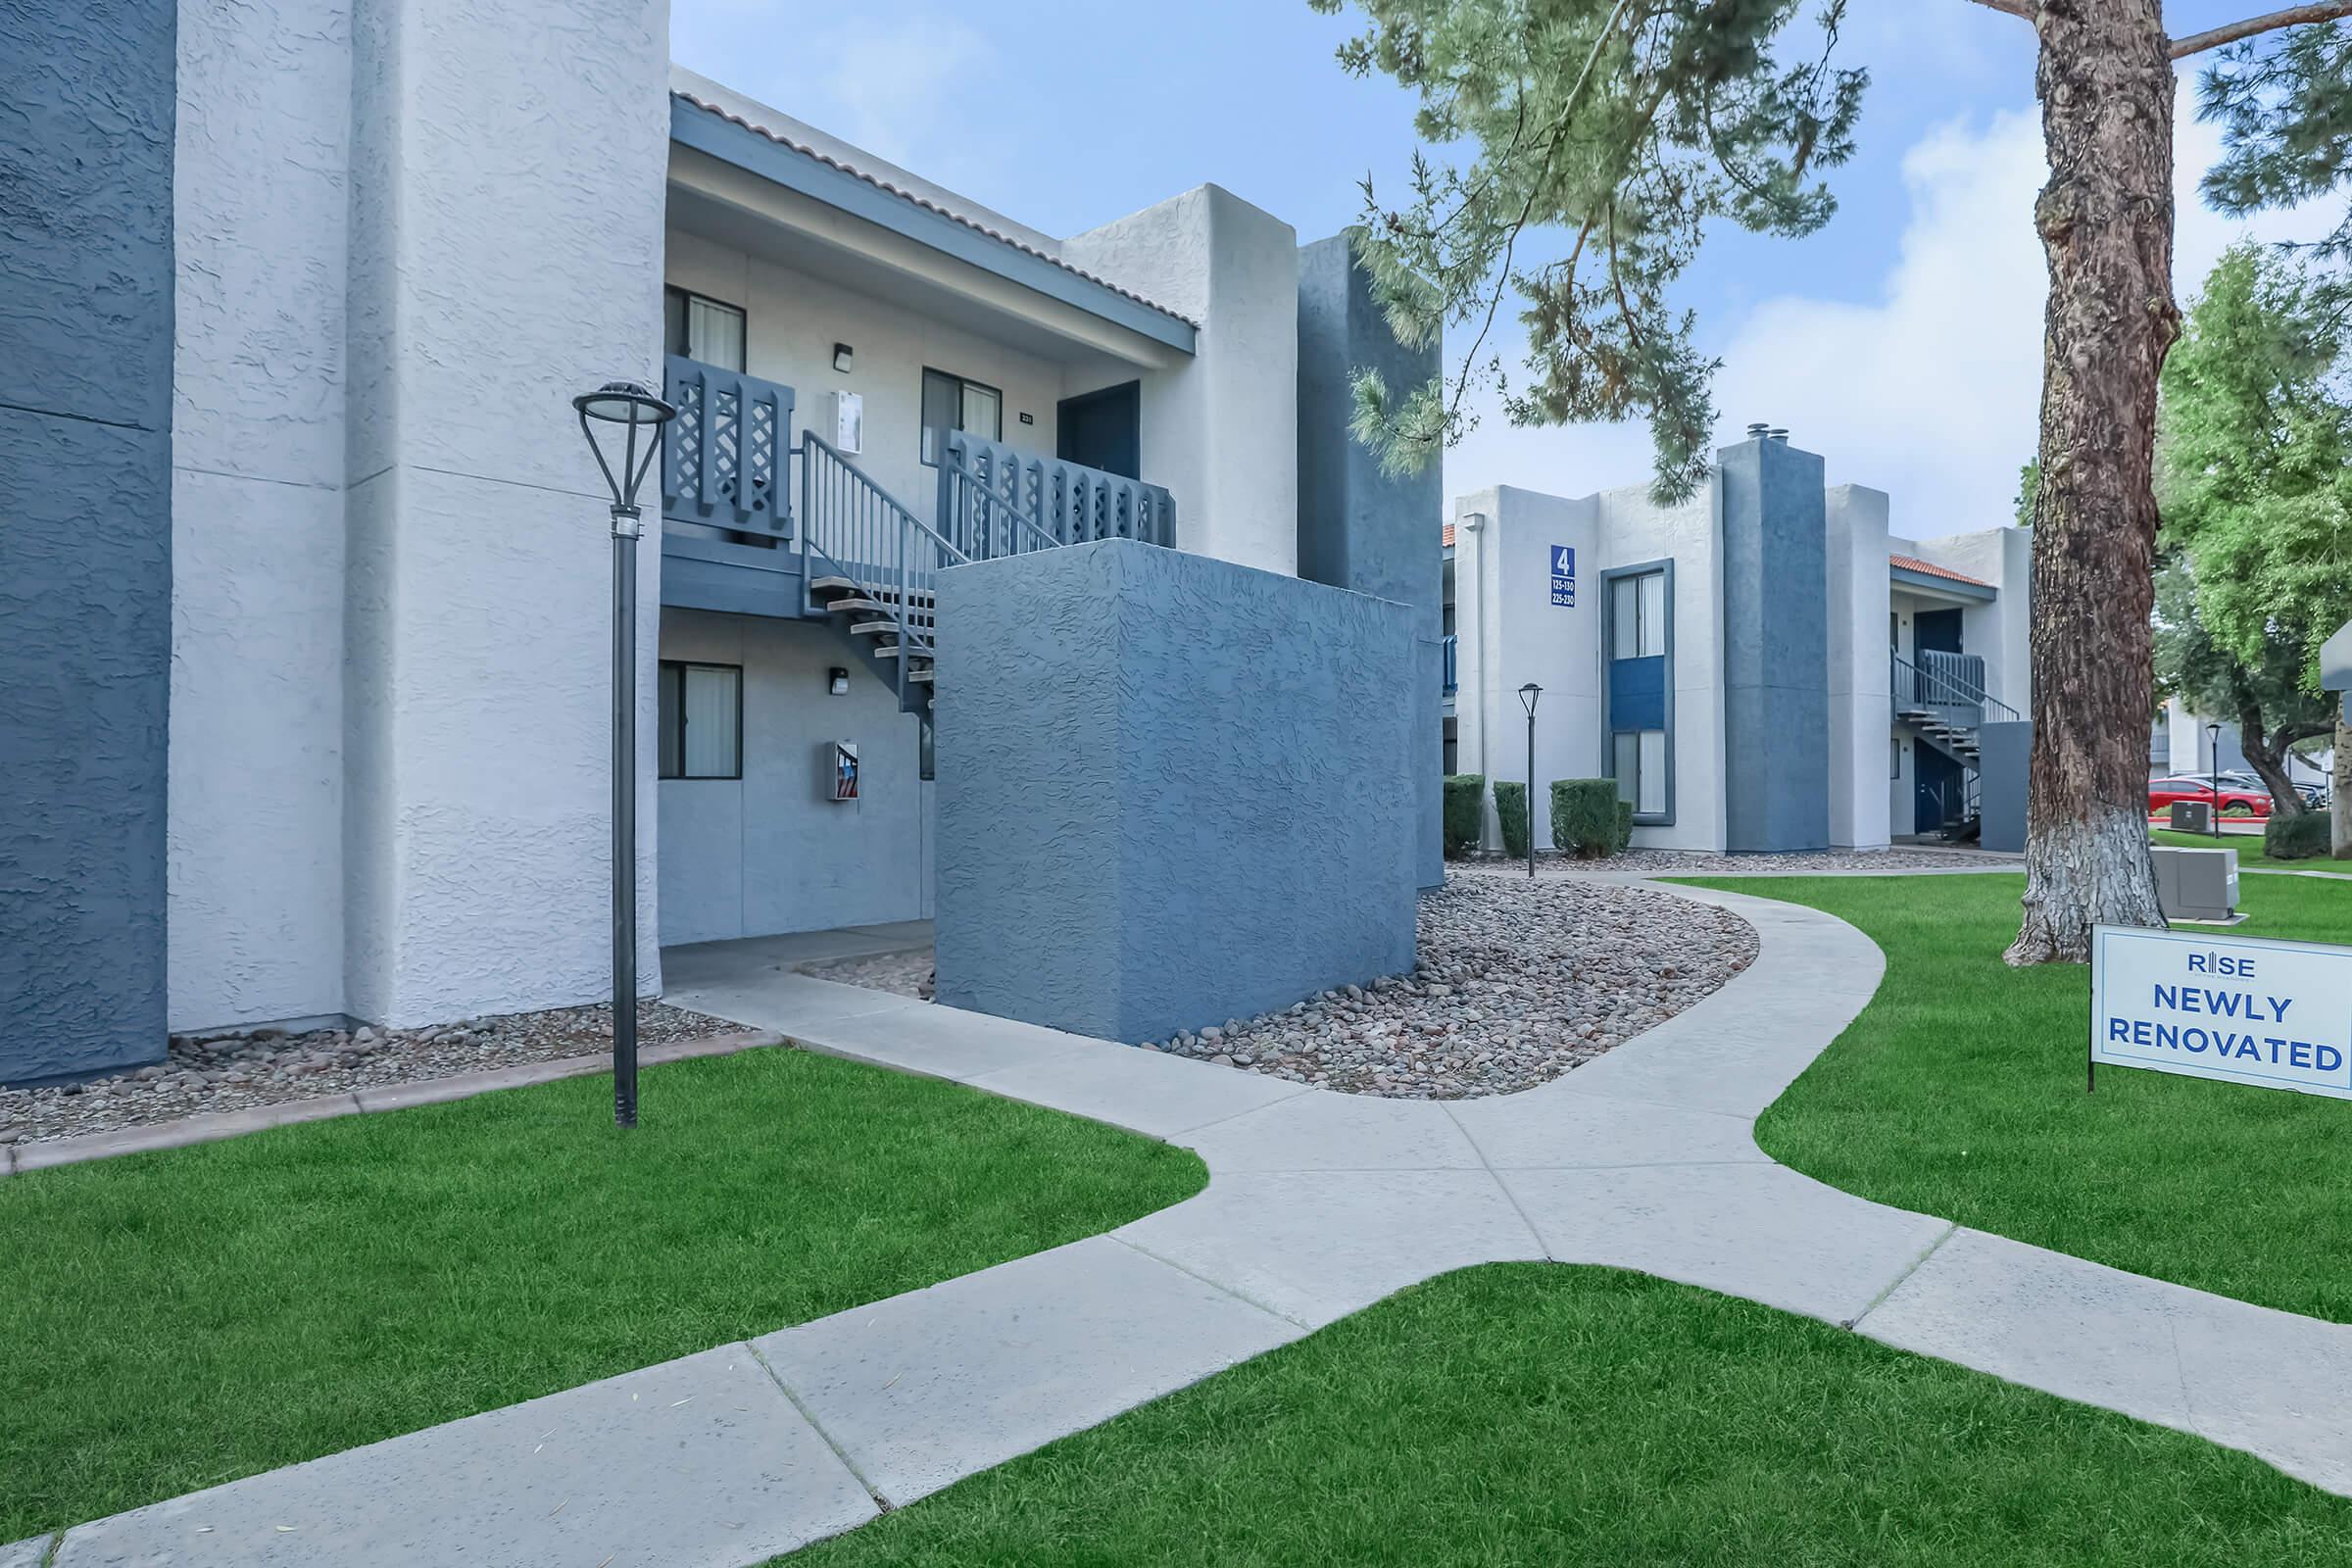 A pathway with landscaping leading to the apartments at Rise at the Meadows.